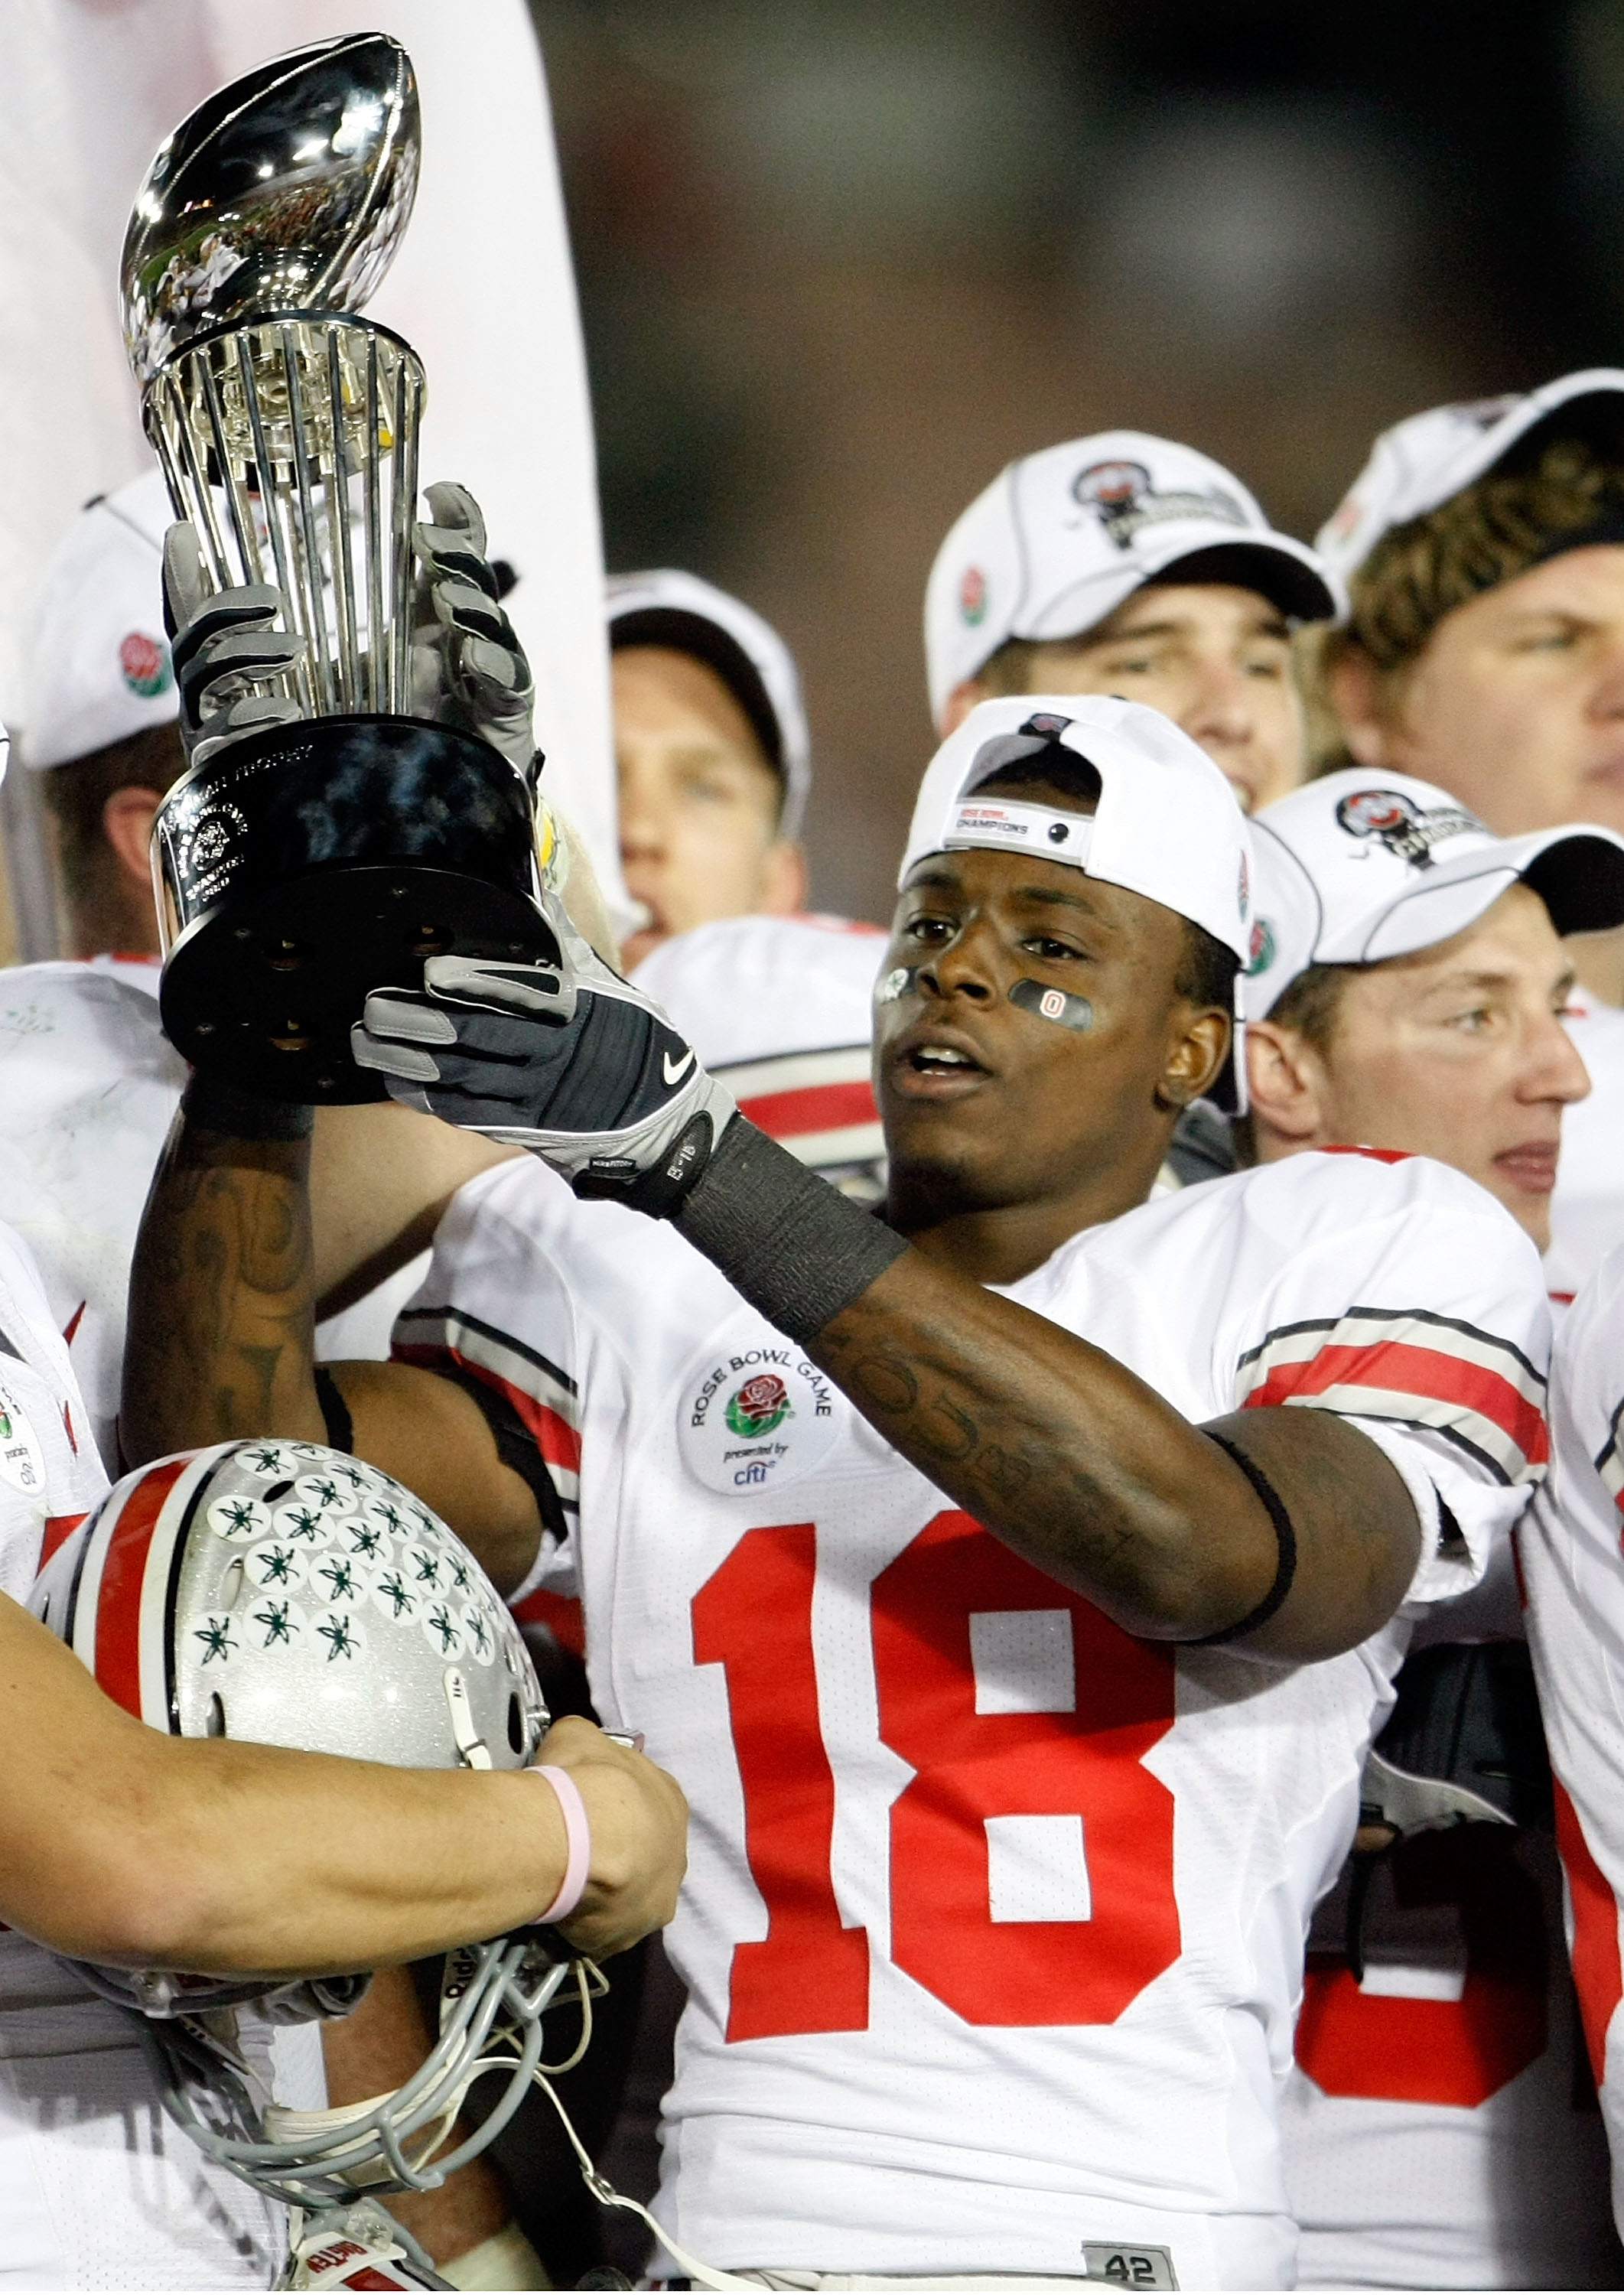 PASADENA, CA - JANUARY 01:  Cornerback Travis Howard #18 of the Ohio State Buckeyes celebrates with the Rose Bowl championship trophy after the Buckeyes 26-17 win over the Oregon Ducks in the 96th Rose Bowl game on January 1, 2010 in Pasadena, California.